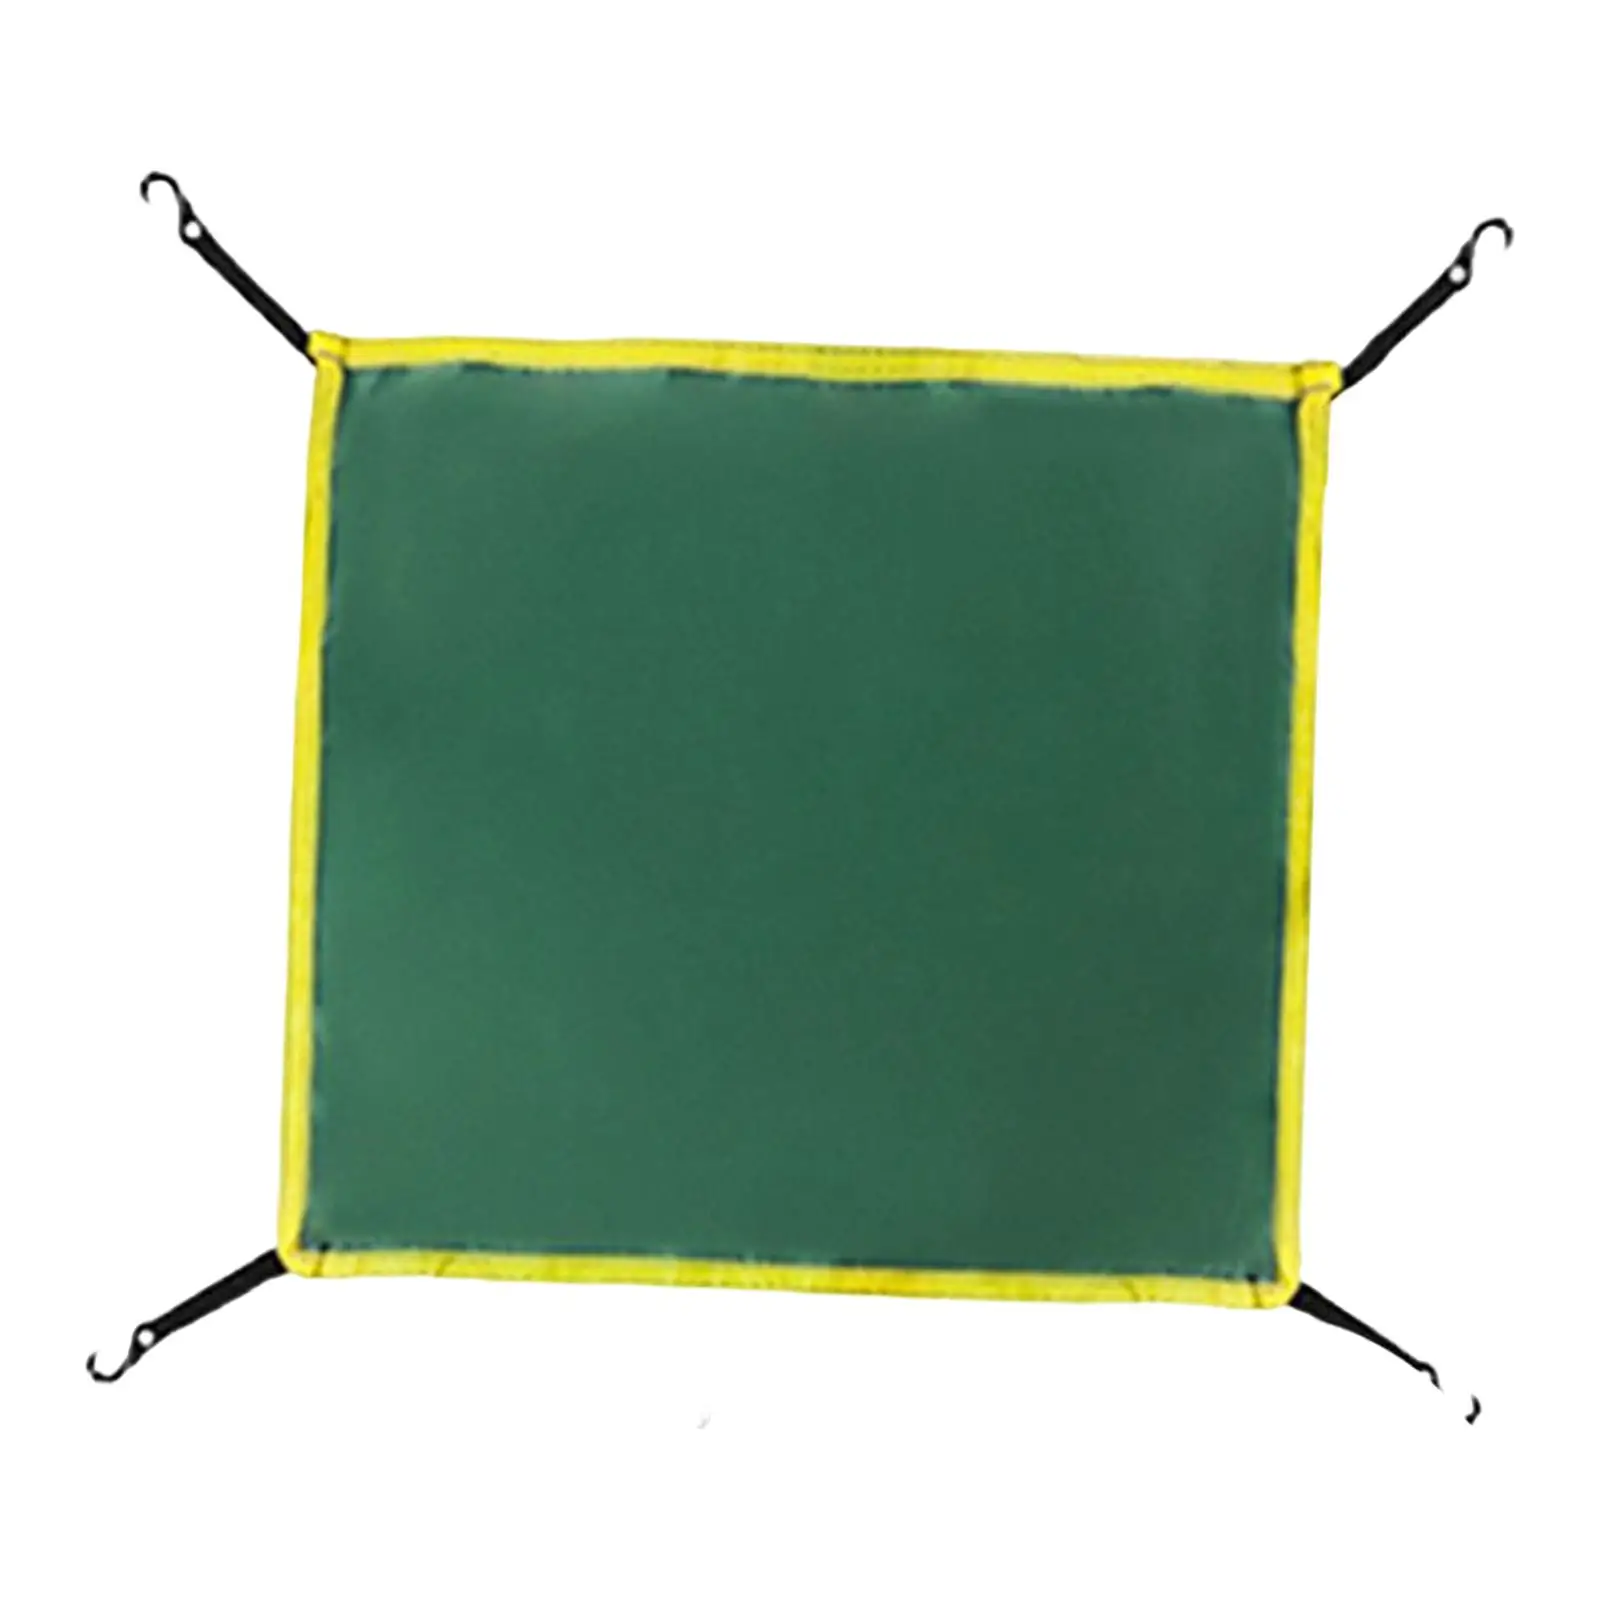 Dome Tent Cover Cover Rainproof Canopy Tent Top Cover Tent Shade for Camping Outdoor Backpacking Fishing Hiking